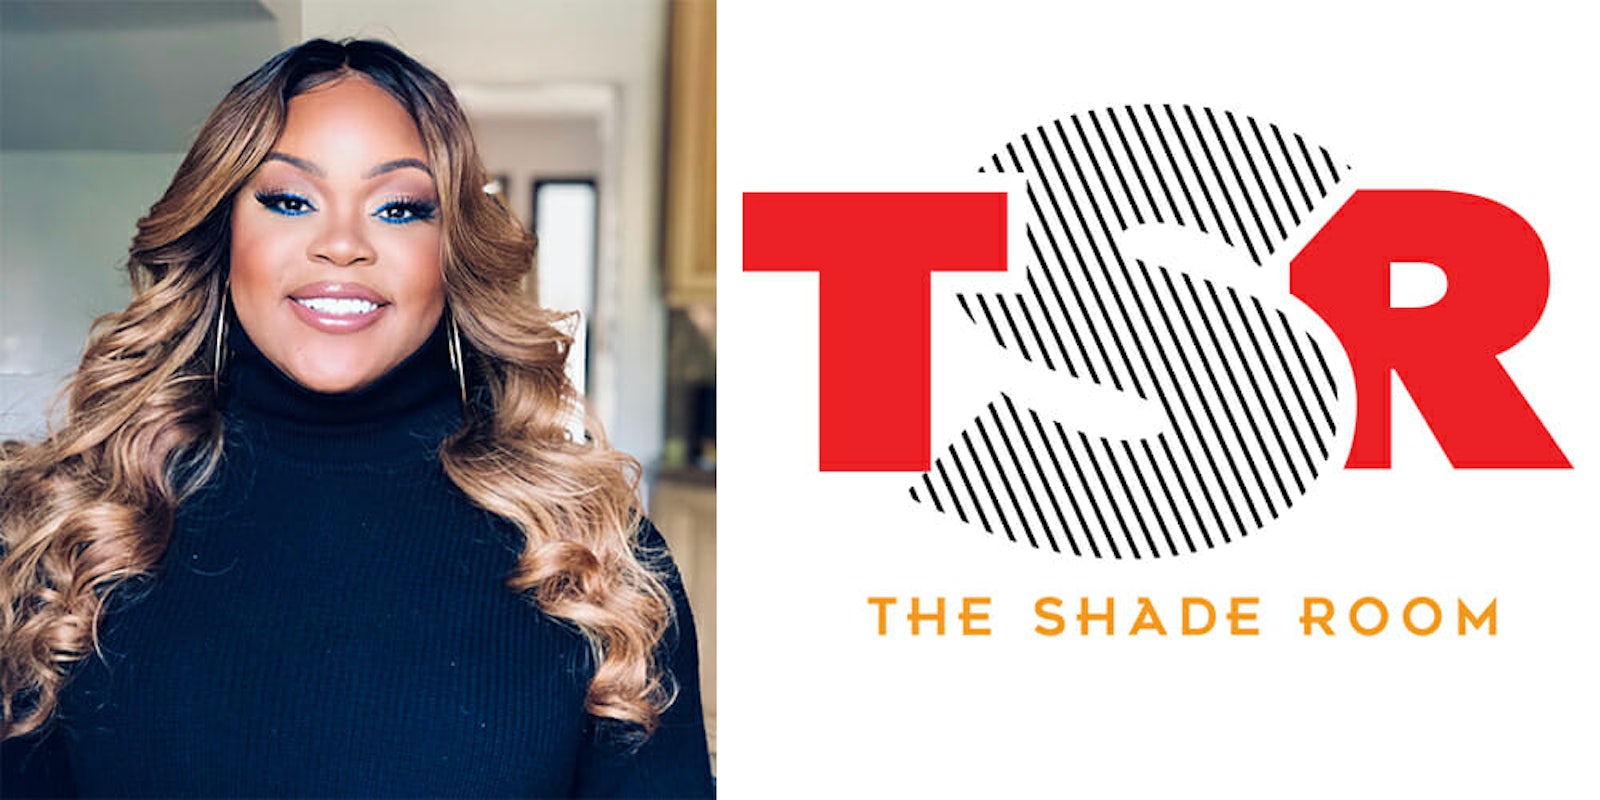 the shade room instagram miniseries